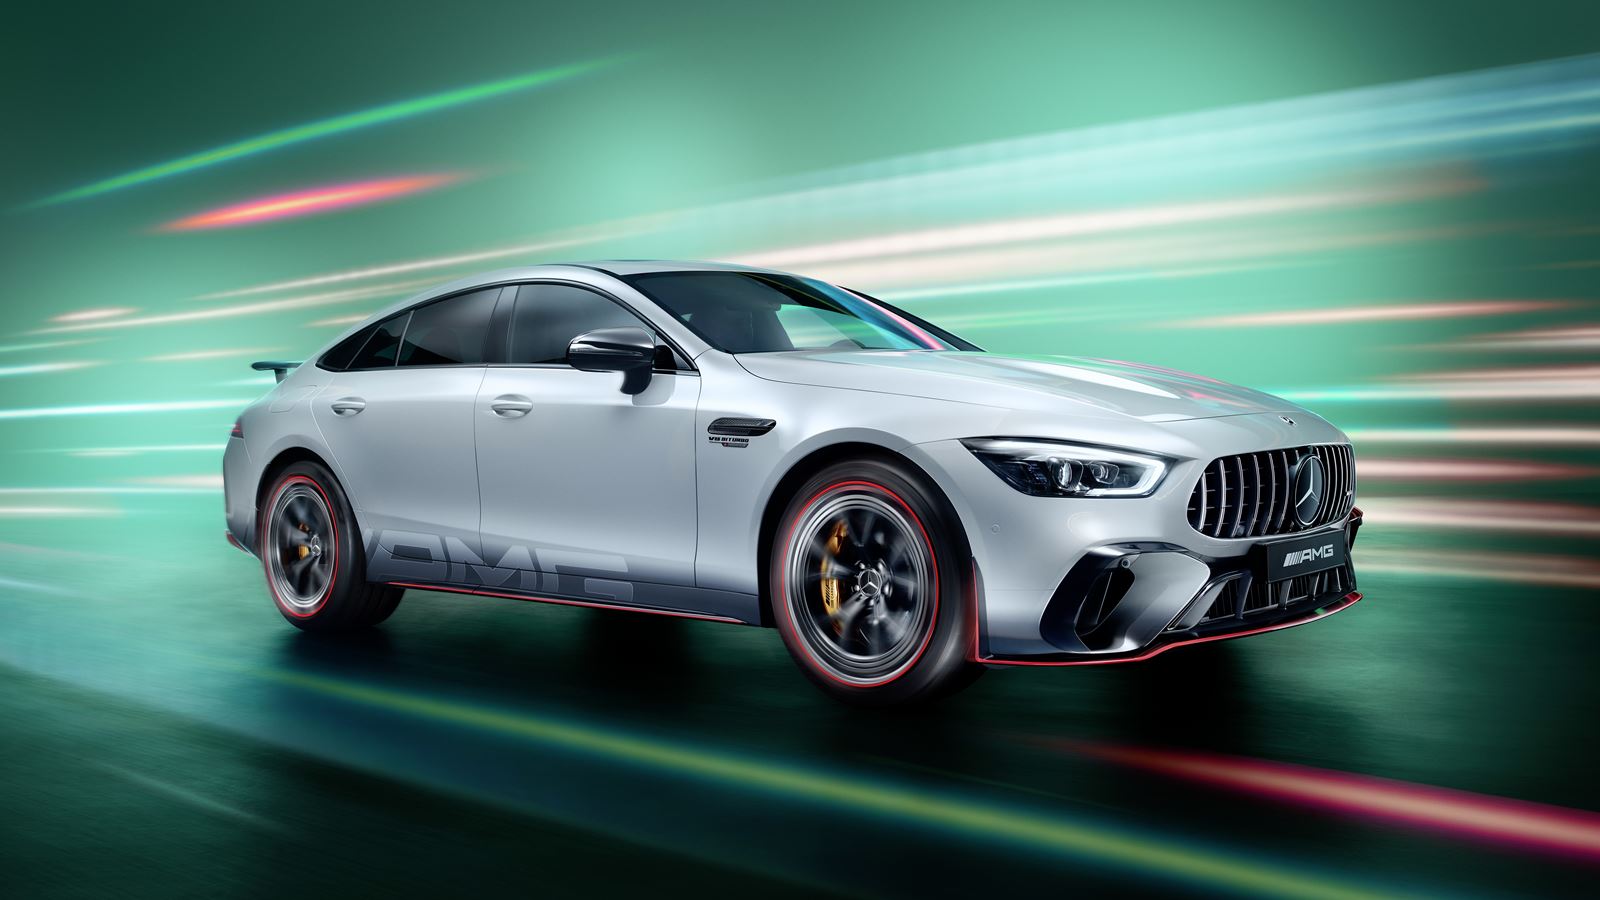 Mercedes-AMG GT 63 S E PERFORMANCE F1 Edition